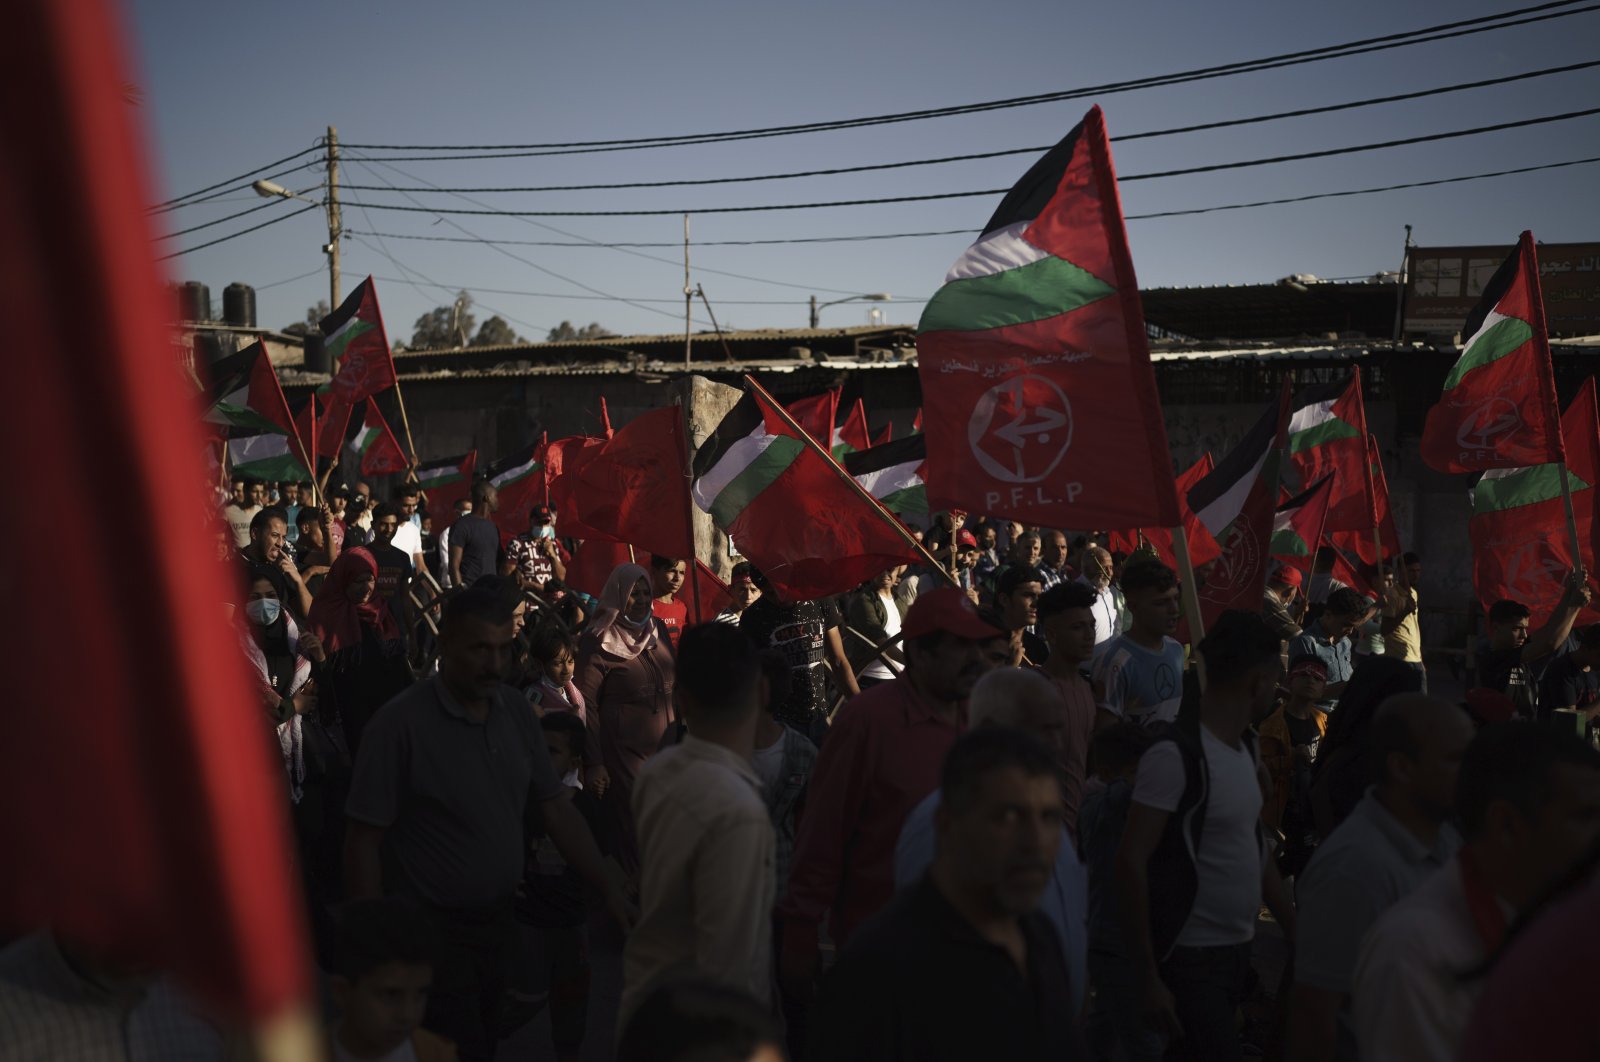 Palestinians attend a rally organized by the Popular Front for the Liberation of Palestine (PFLP), in the Gaza Strip, Palestine, June 2, 2021. (AP Photo)